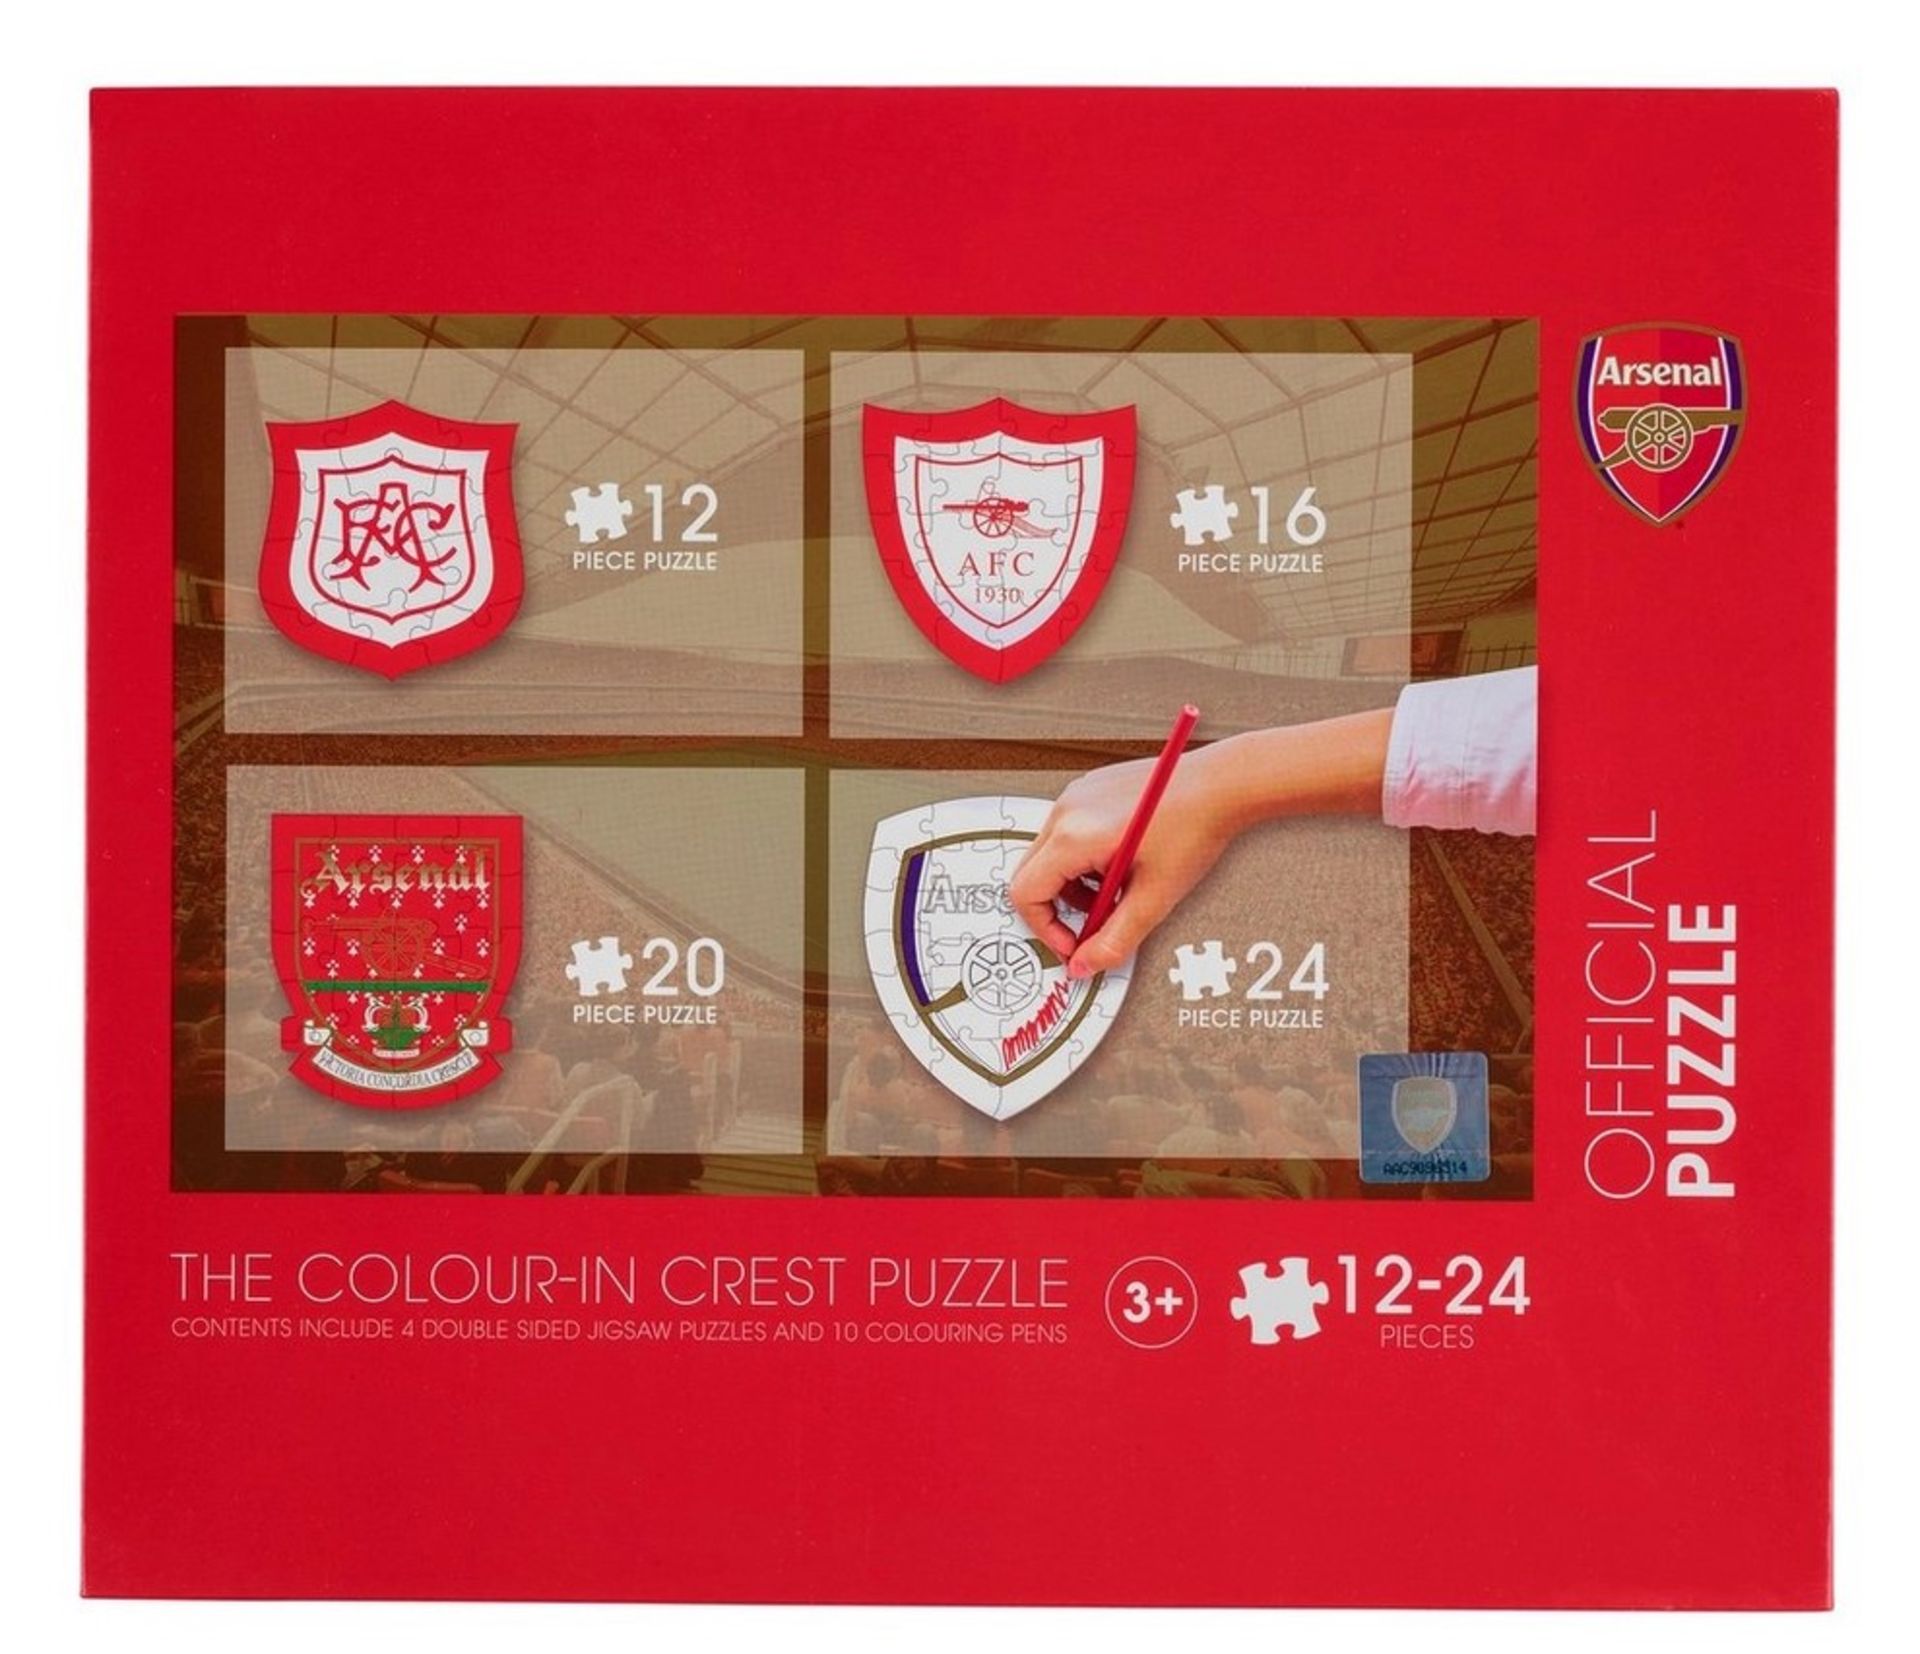 100 X BRAND NEW SEALED ARSENAL JIGSAW PUZZLE - OFFICIAL LICENSED MERCHANDISE